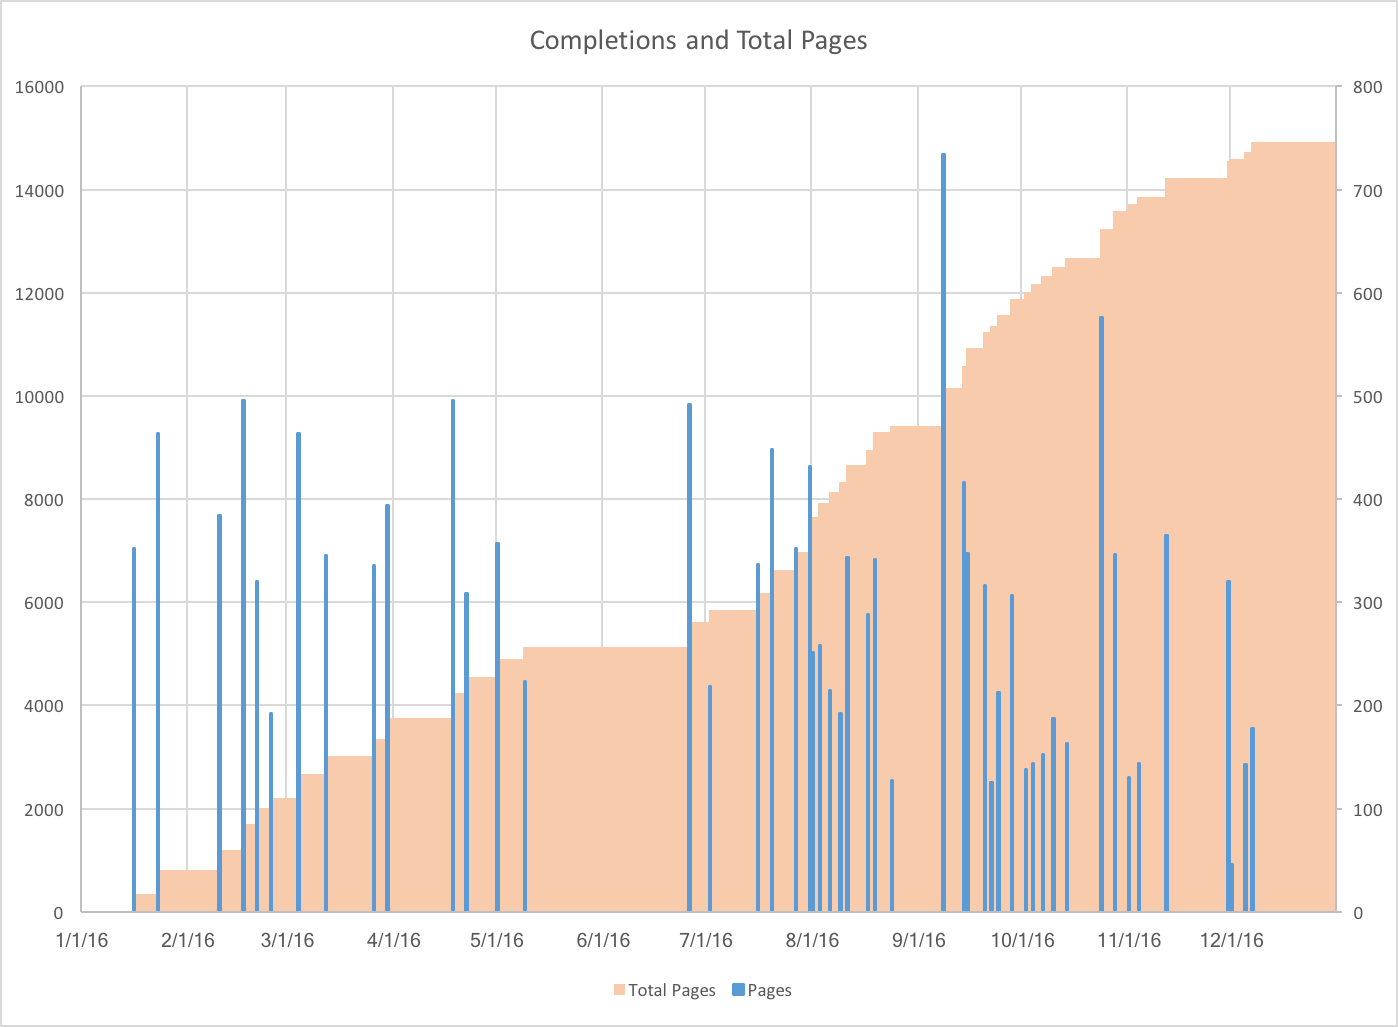 2016 Completions and Total Pages Read